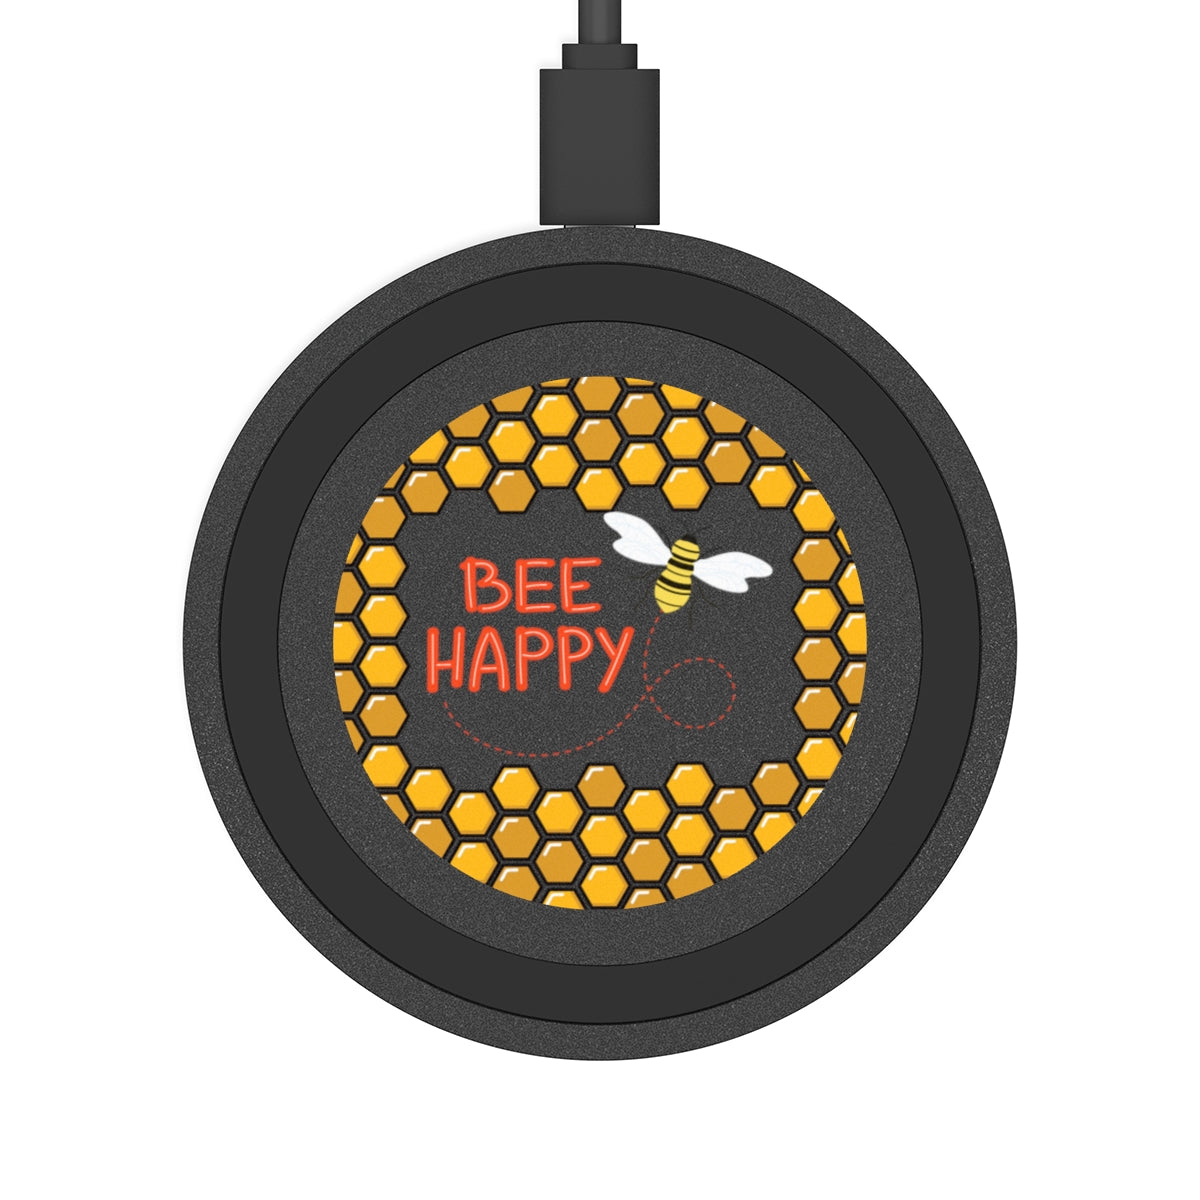 Bee Happy Inspirational gifts Wireless Charging Pad